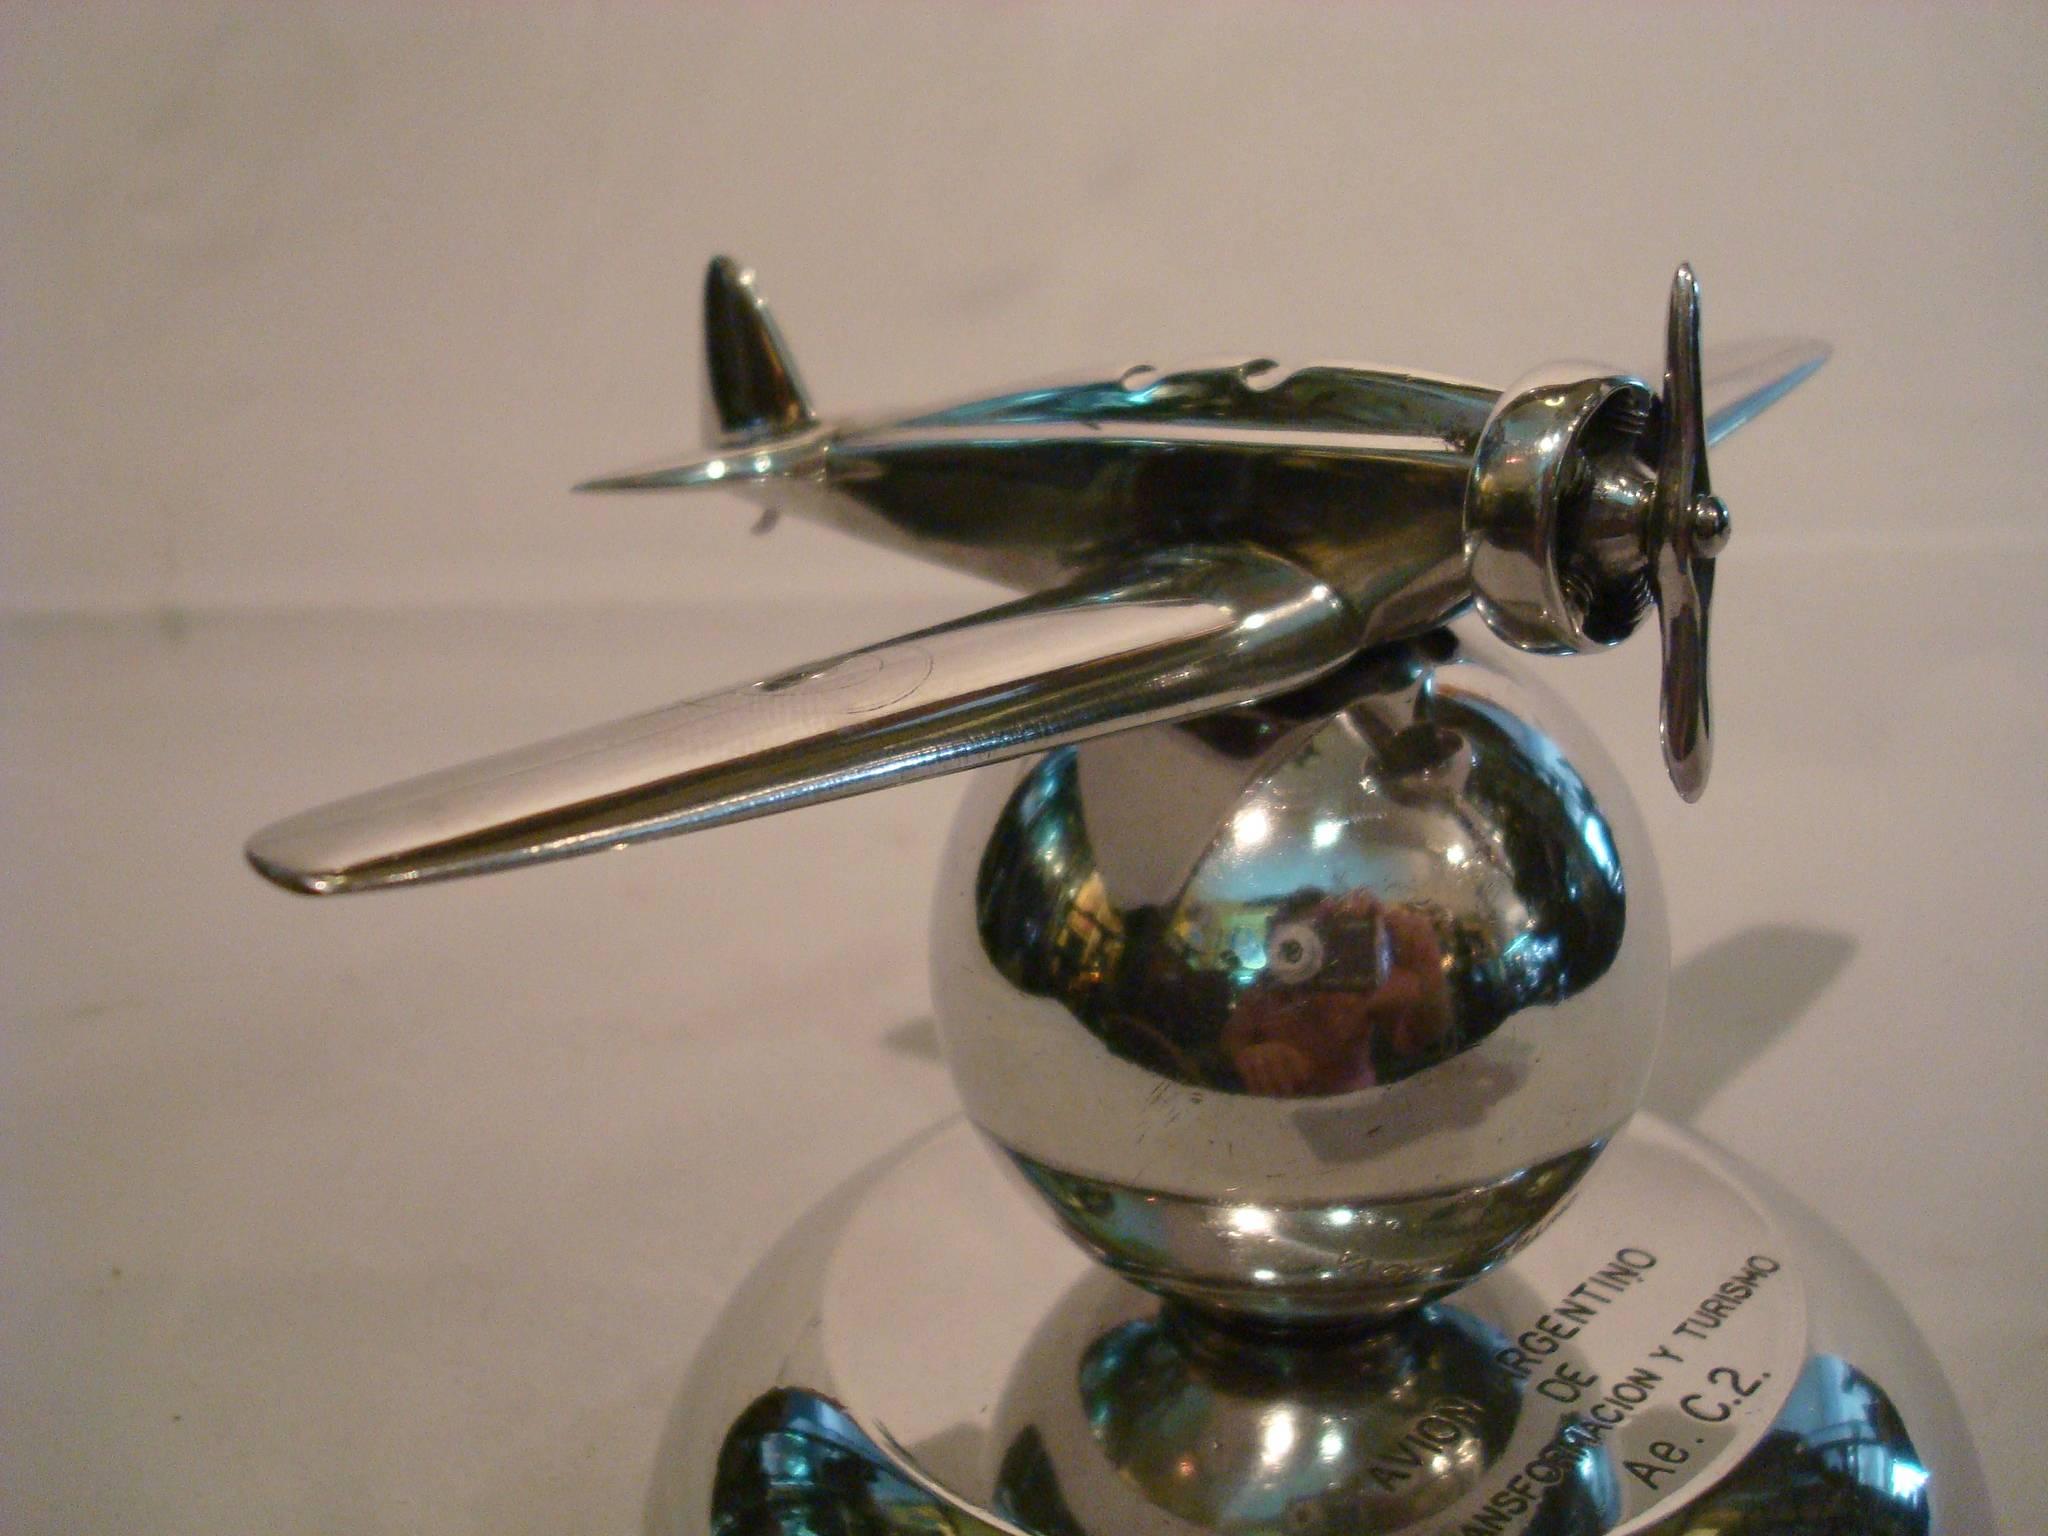 Argentine Art Deco Airplane Fighter over the World Paperweight, 1930s